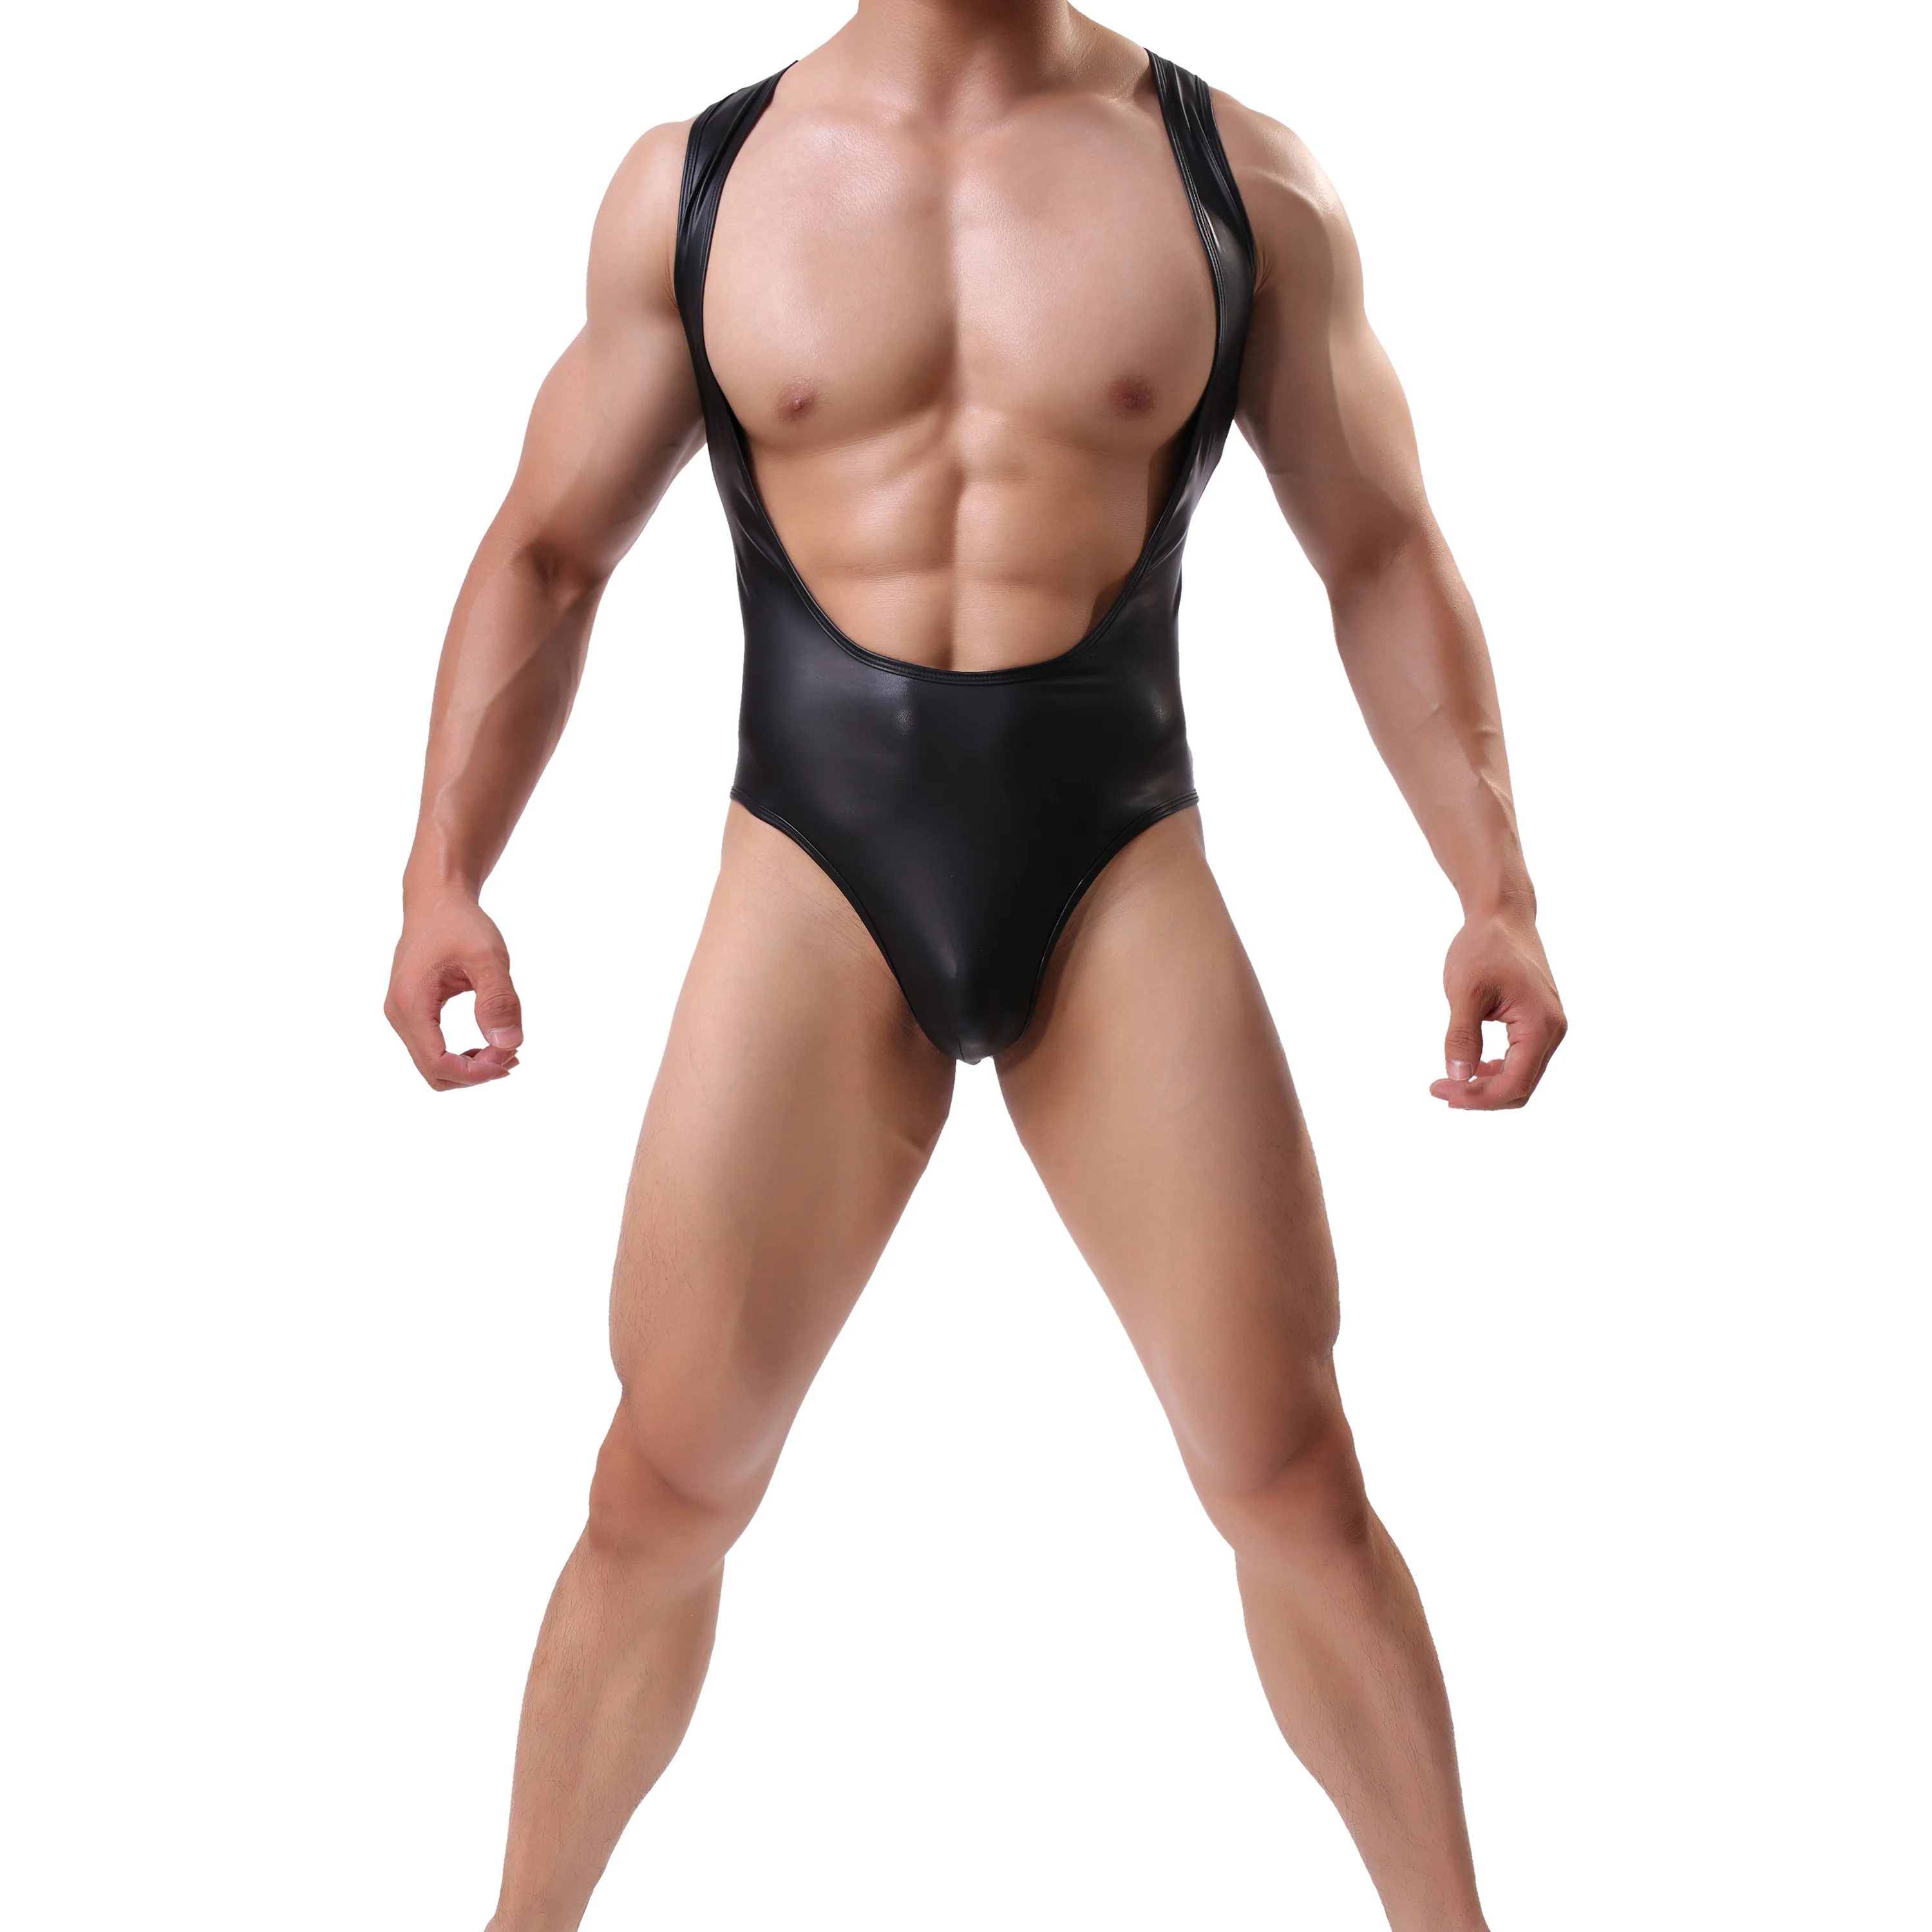 

Hot selling mens Bodybuilding Bodysuits sexy gay black leather underwear, Existing or as customer's require